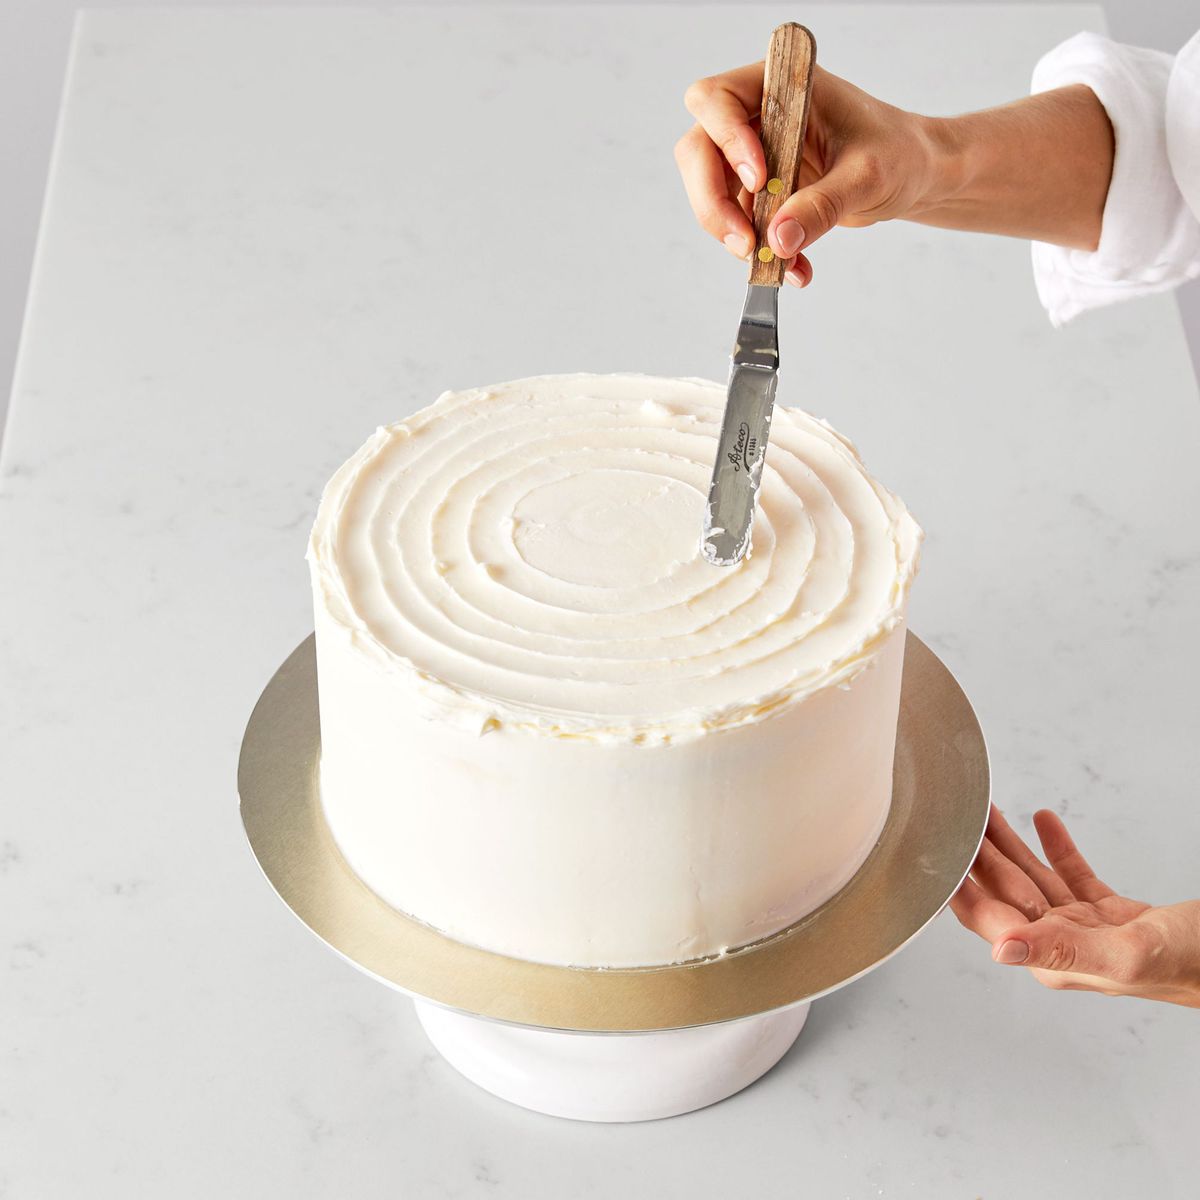 How to Frost a Ruffle Cake Step 1